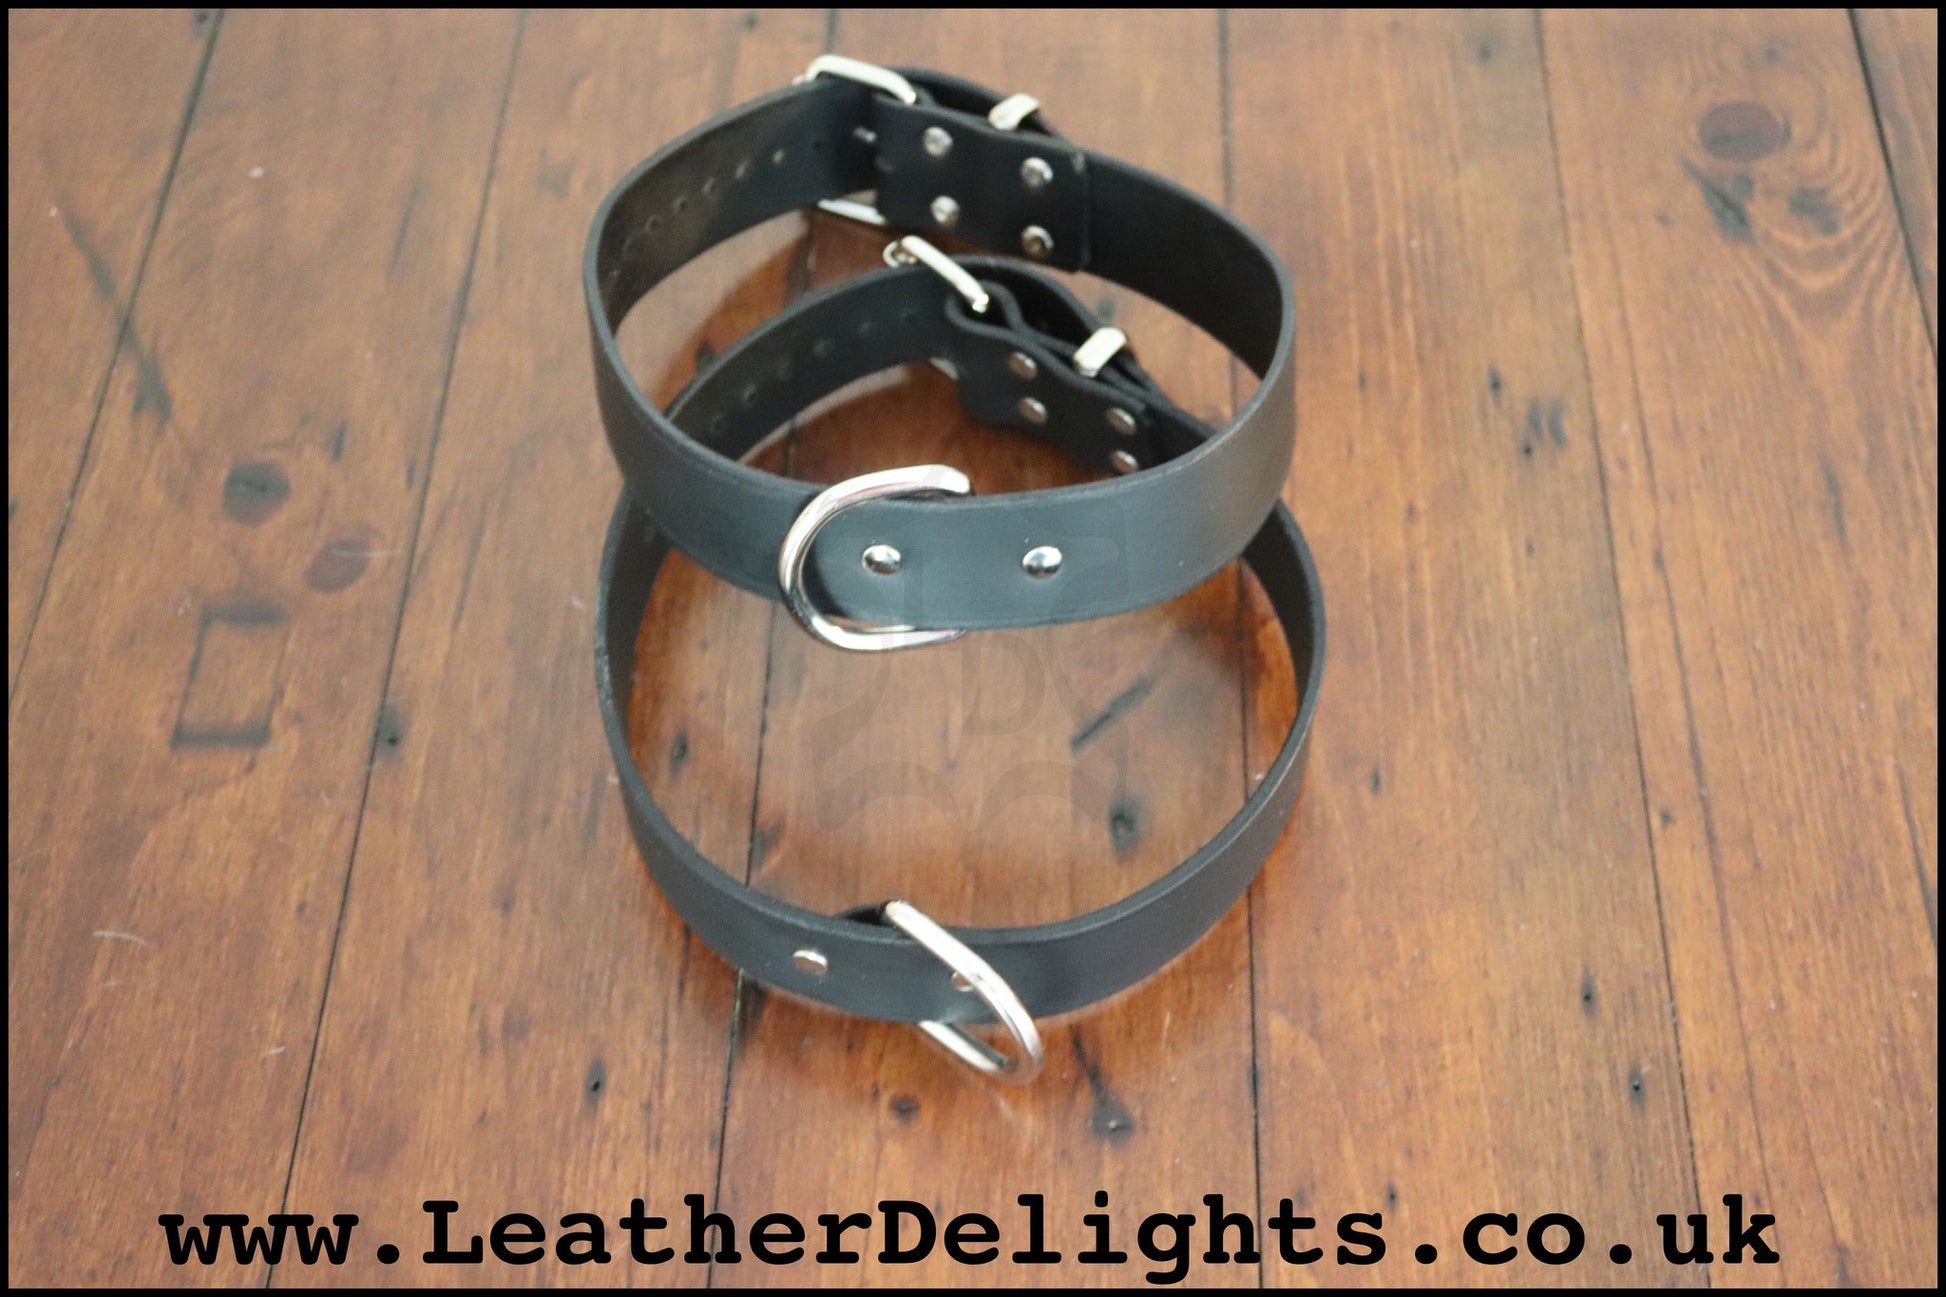 Simple Thigh Cuffs - Leather Delights